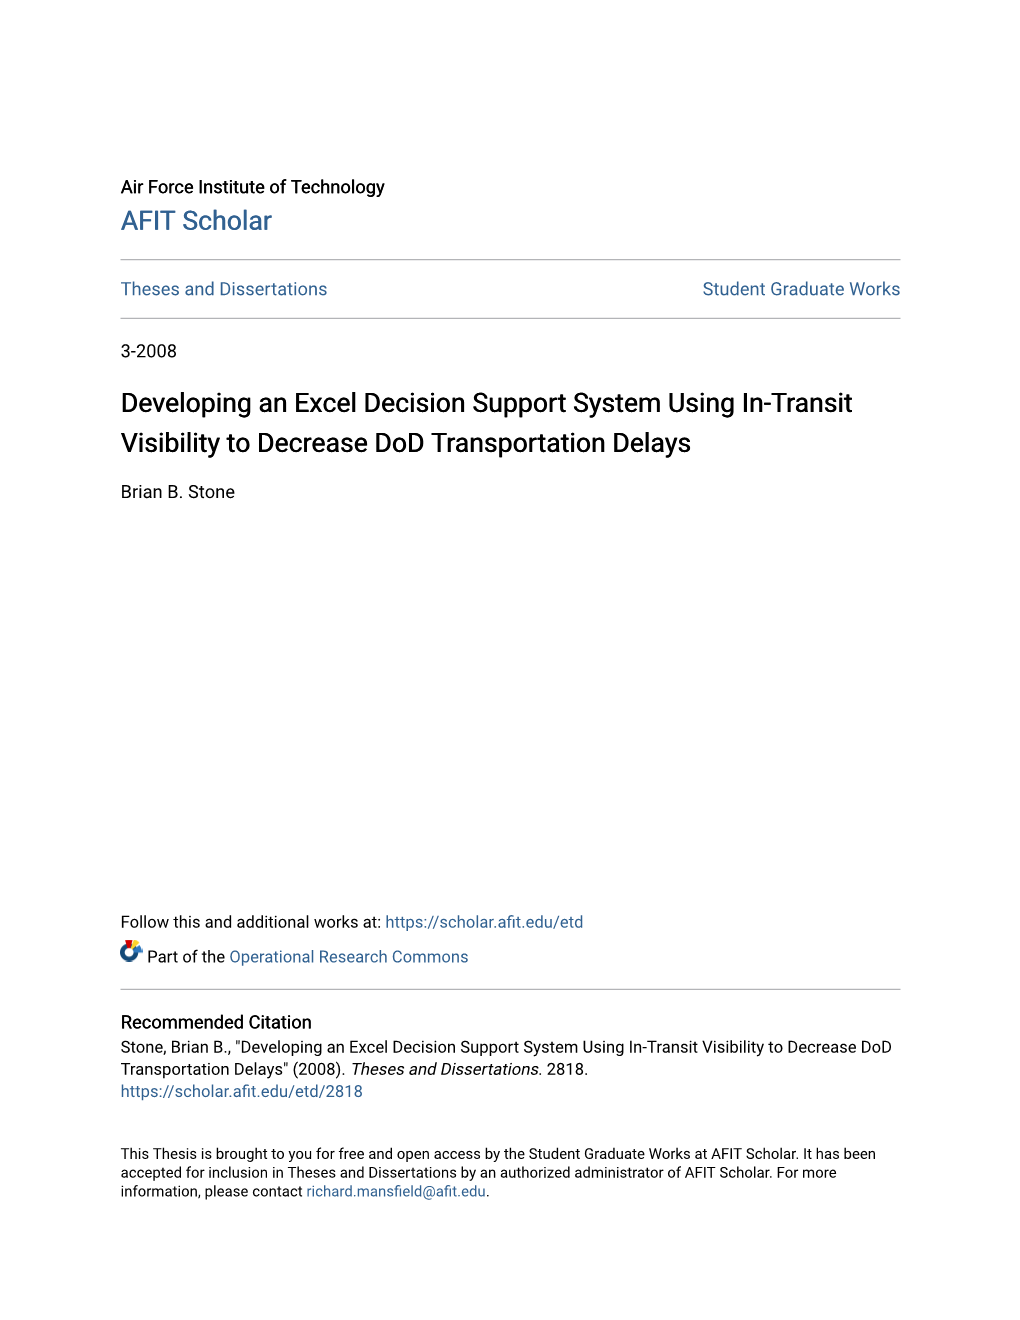 Developing an Excel Decision Support System Using In-Transit Visibility to Decrease Dod Transportation Delays